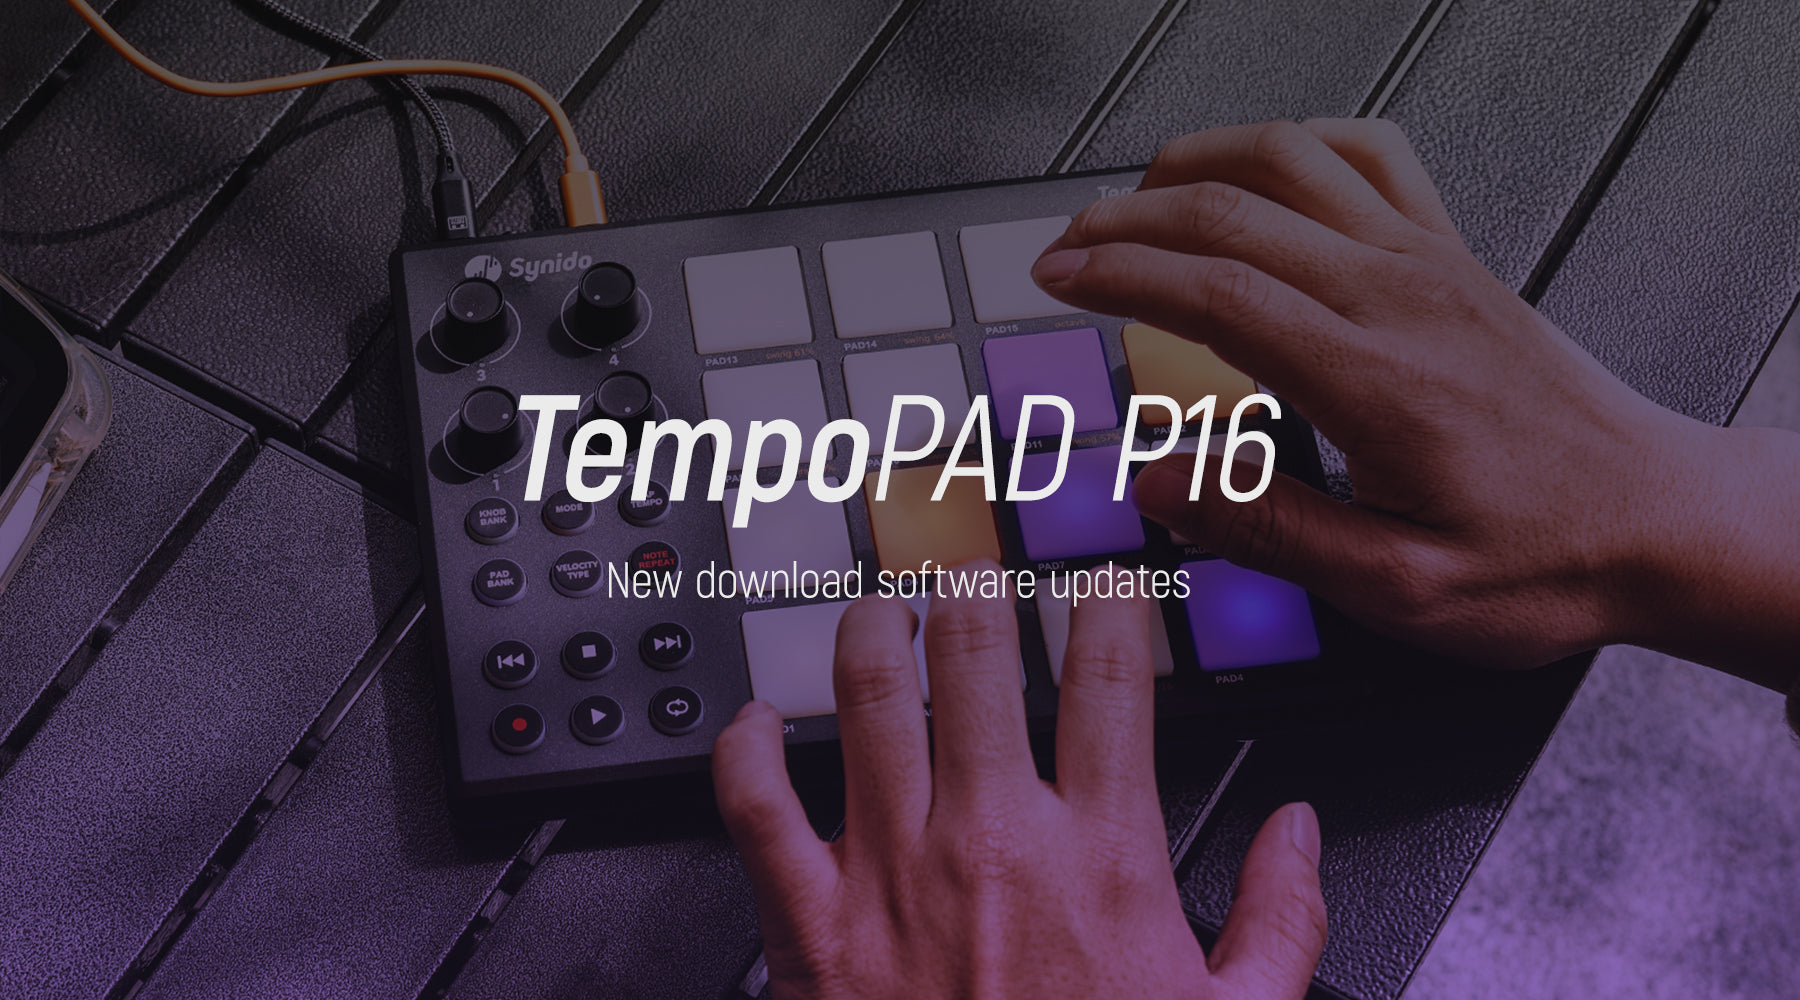 Synido TempoPAD MIDI Controller’s Control Panel is now available for iPhone and Mac!